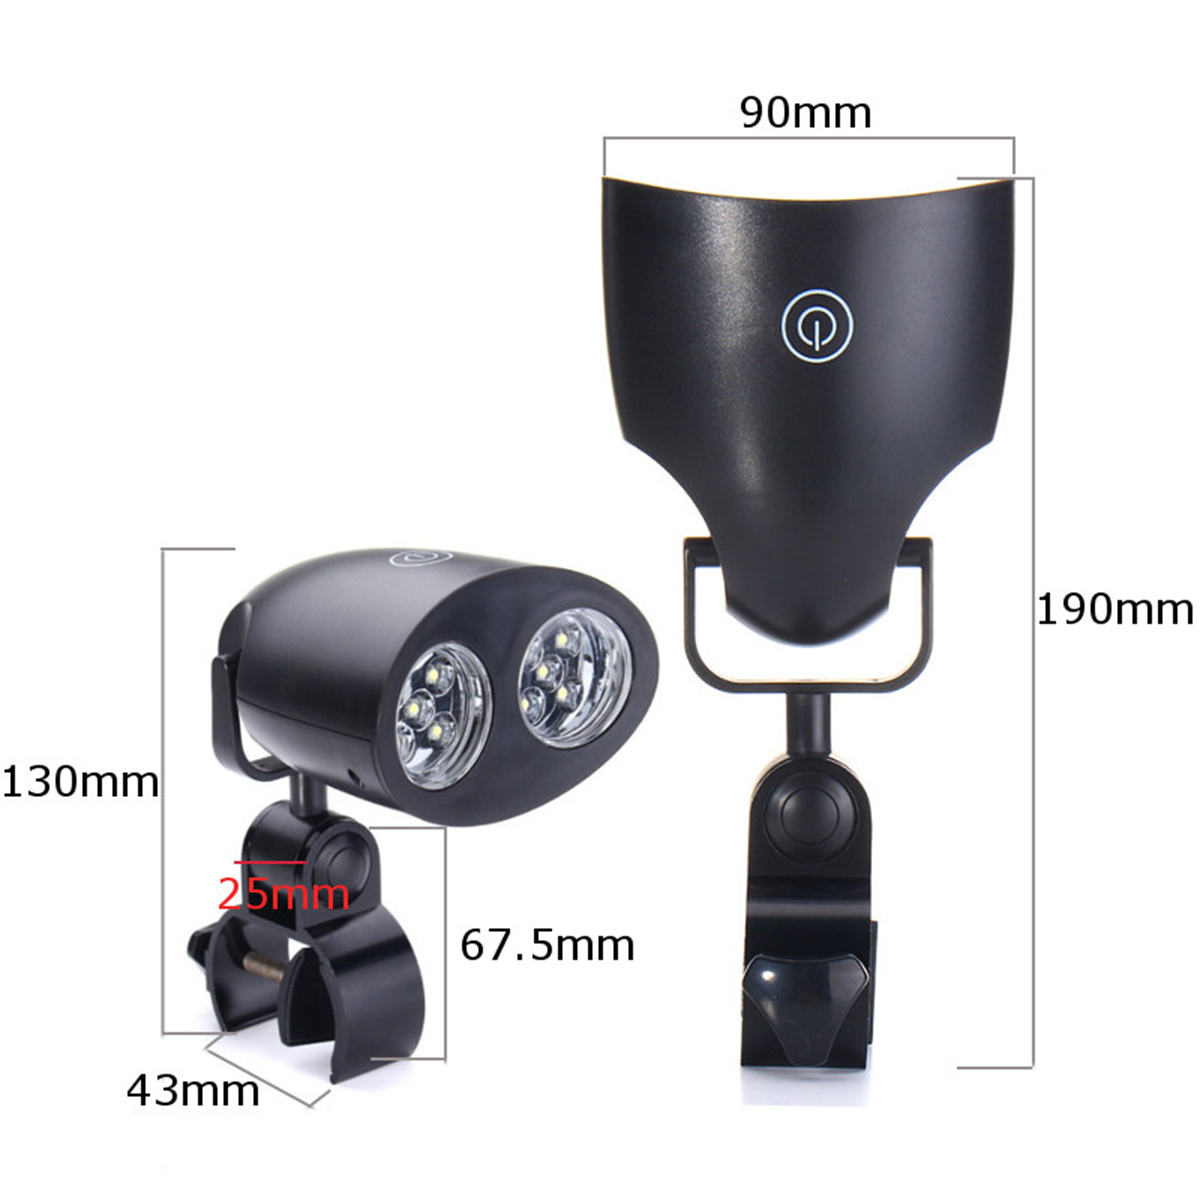 10-LED-BBQ-Grill-Barbecue-Sensor-Light-Outdoor-Waterproof-Handle-Mount-Clip-Camp-Lamp-DC-45V-1257898-3